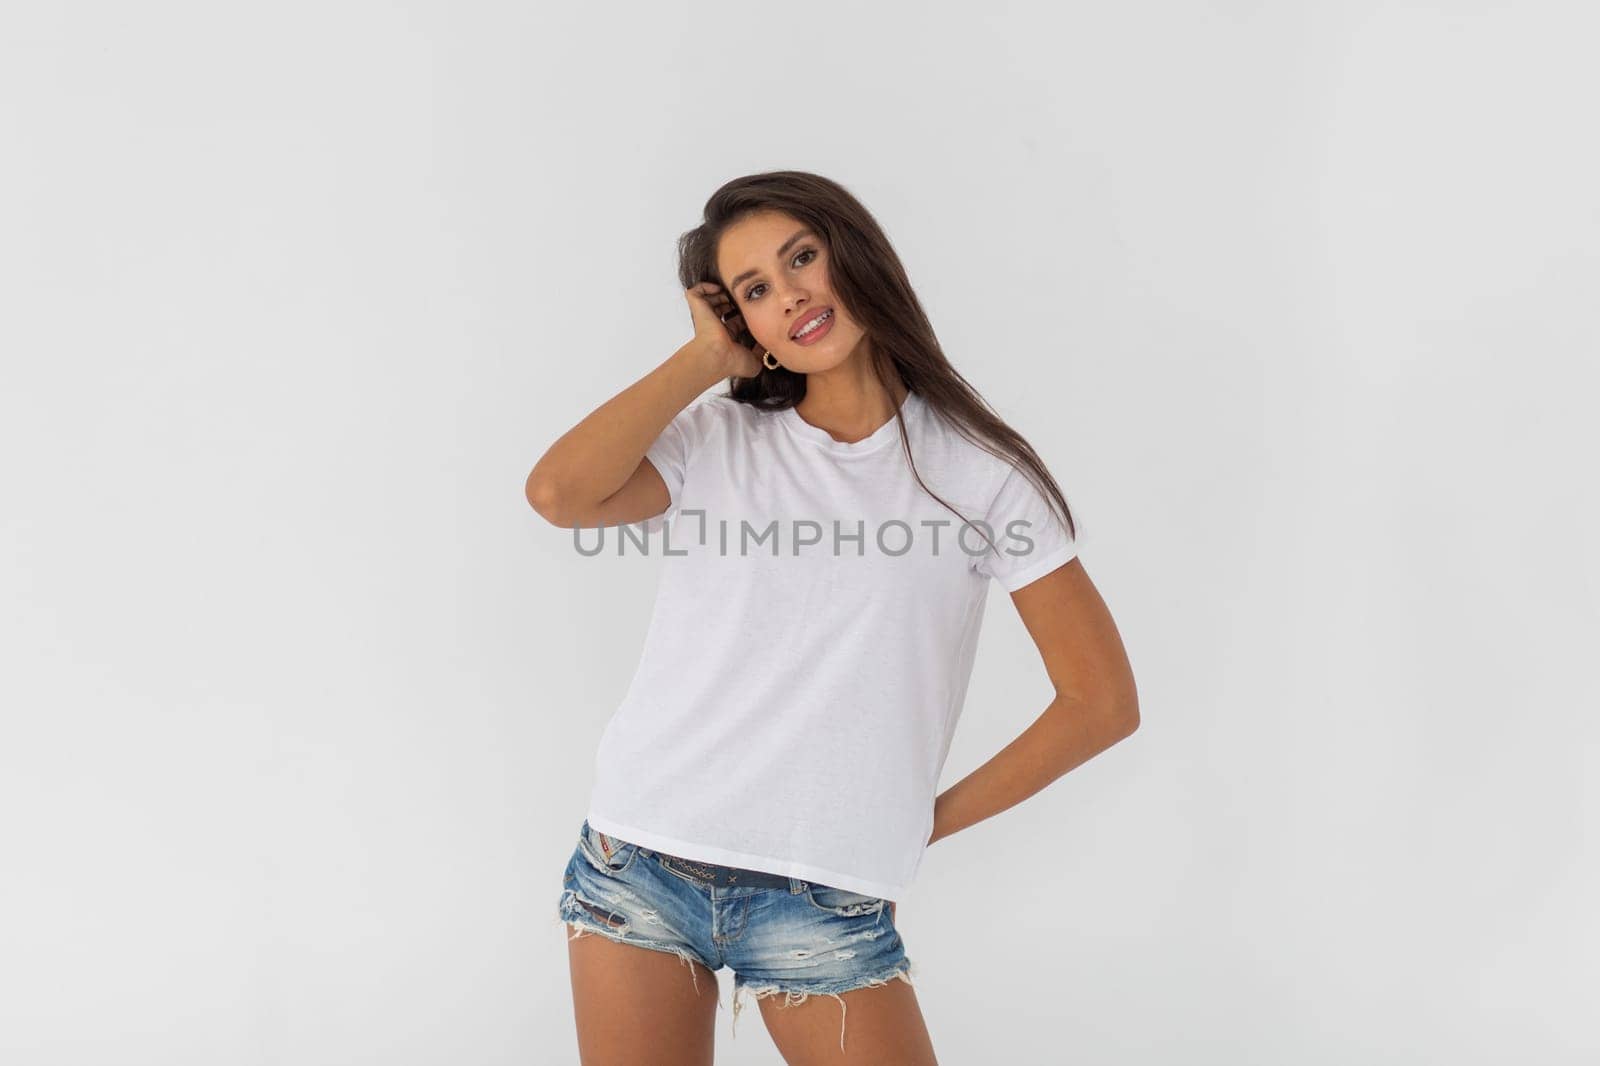 Beautiful brunette girl in a white T-shirt and denim shorts posing on a white background. High quality photo